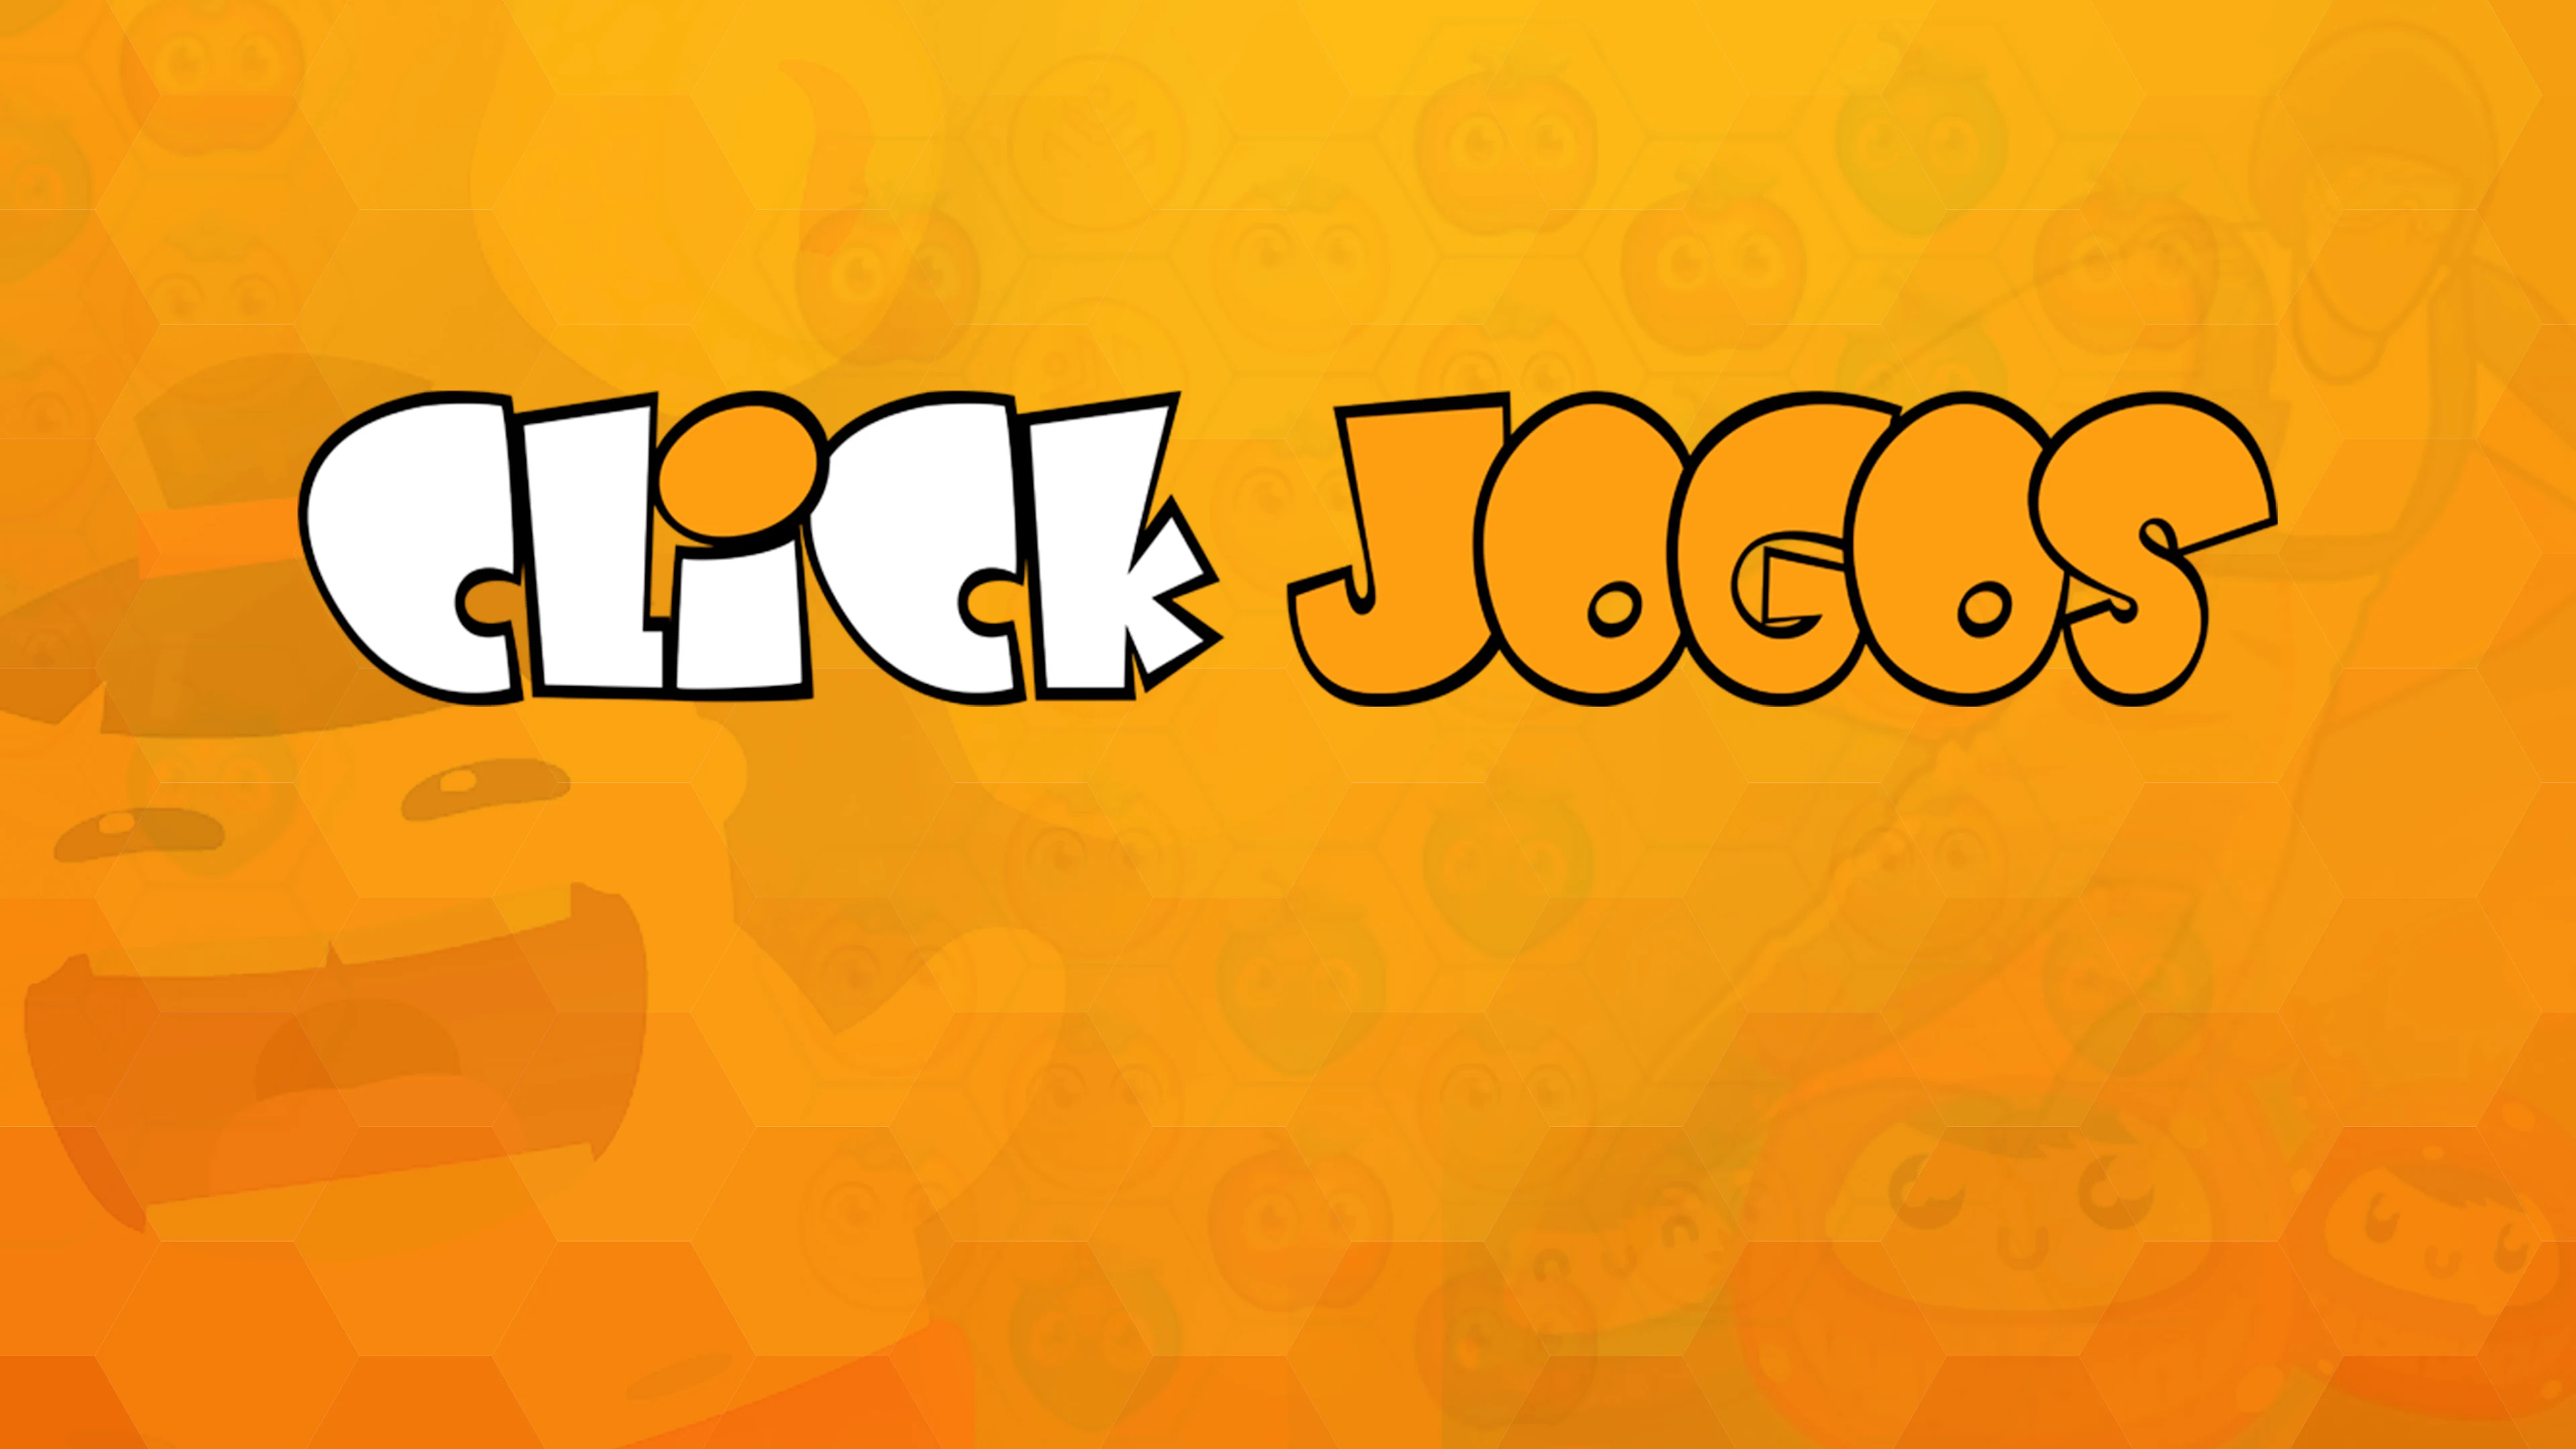 Android Apps by ClickJogos on Google Play